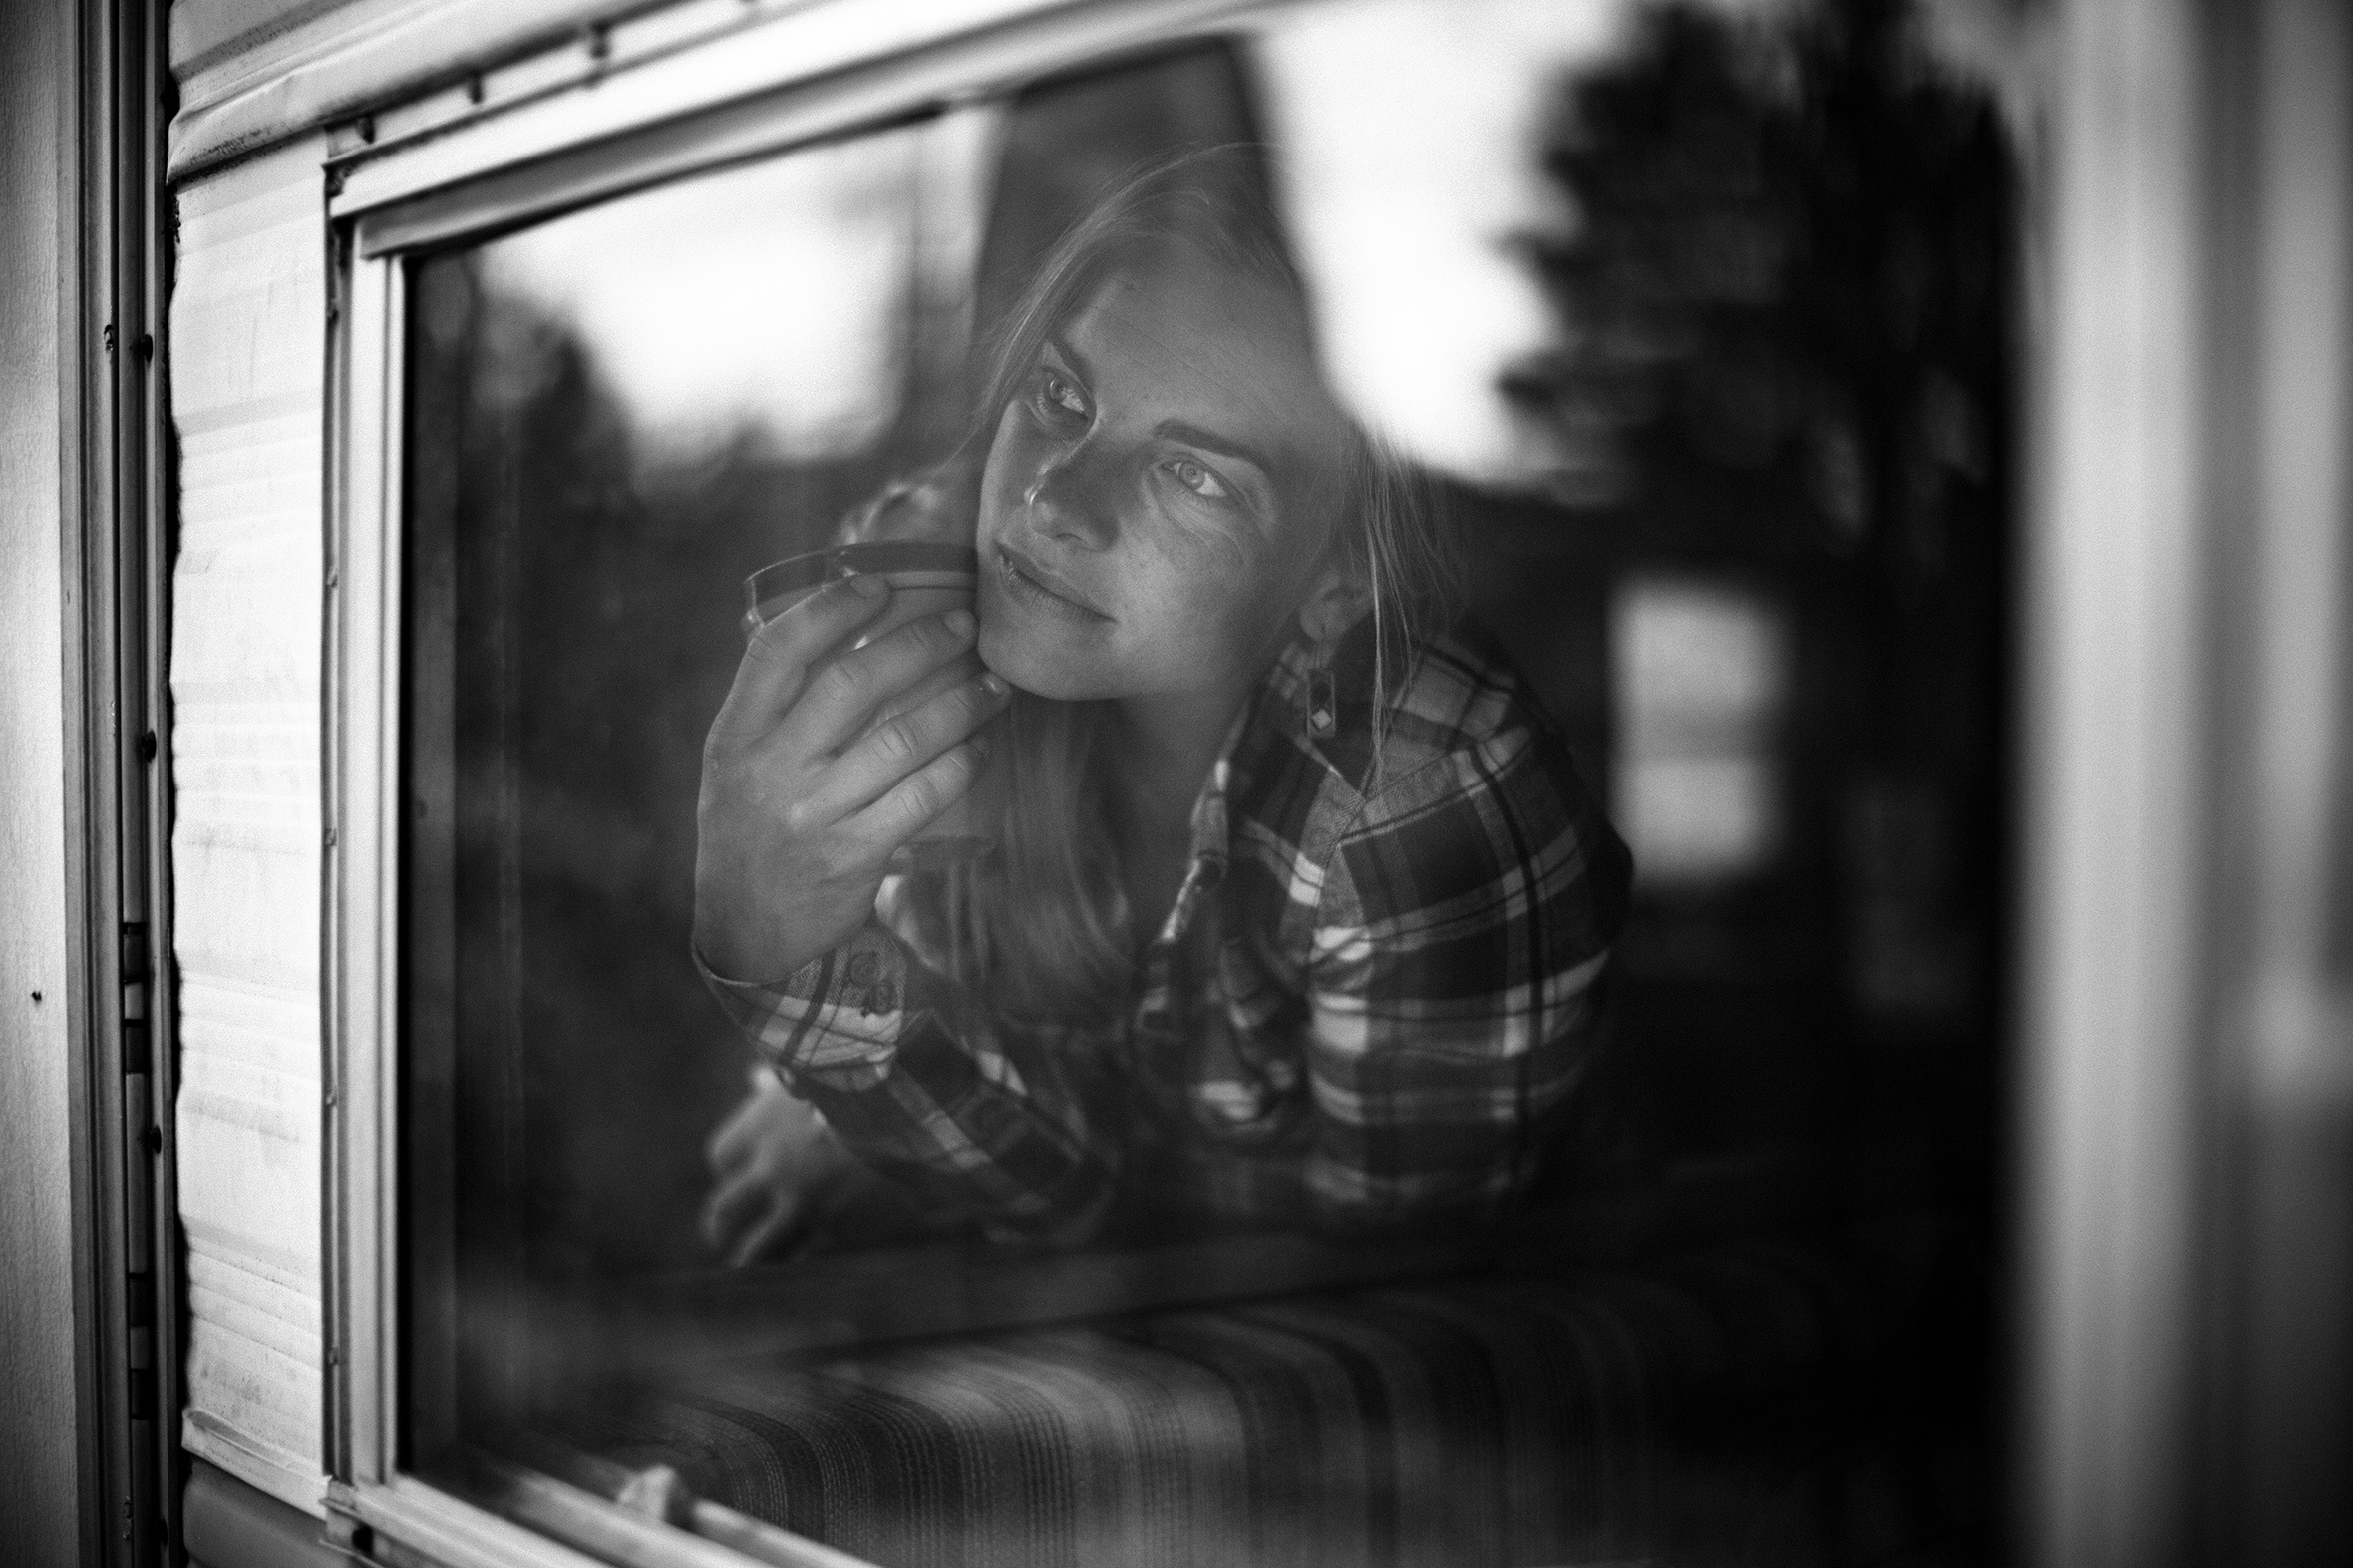 A woman leans forward and looks out of what appears to be the window of an RV. She is wearing a flannel shirt and holding a cup near her face.